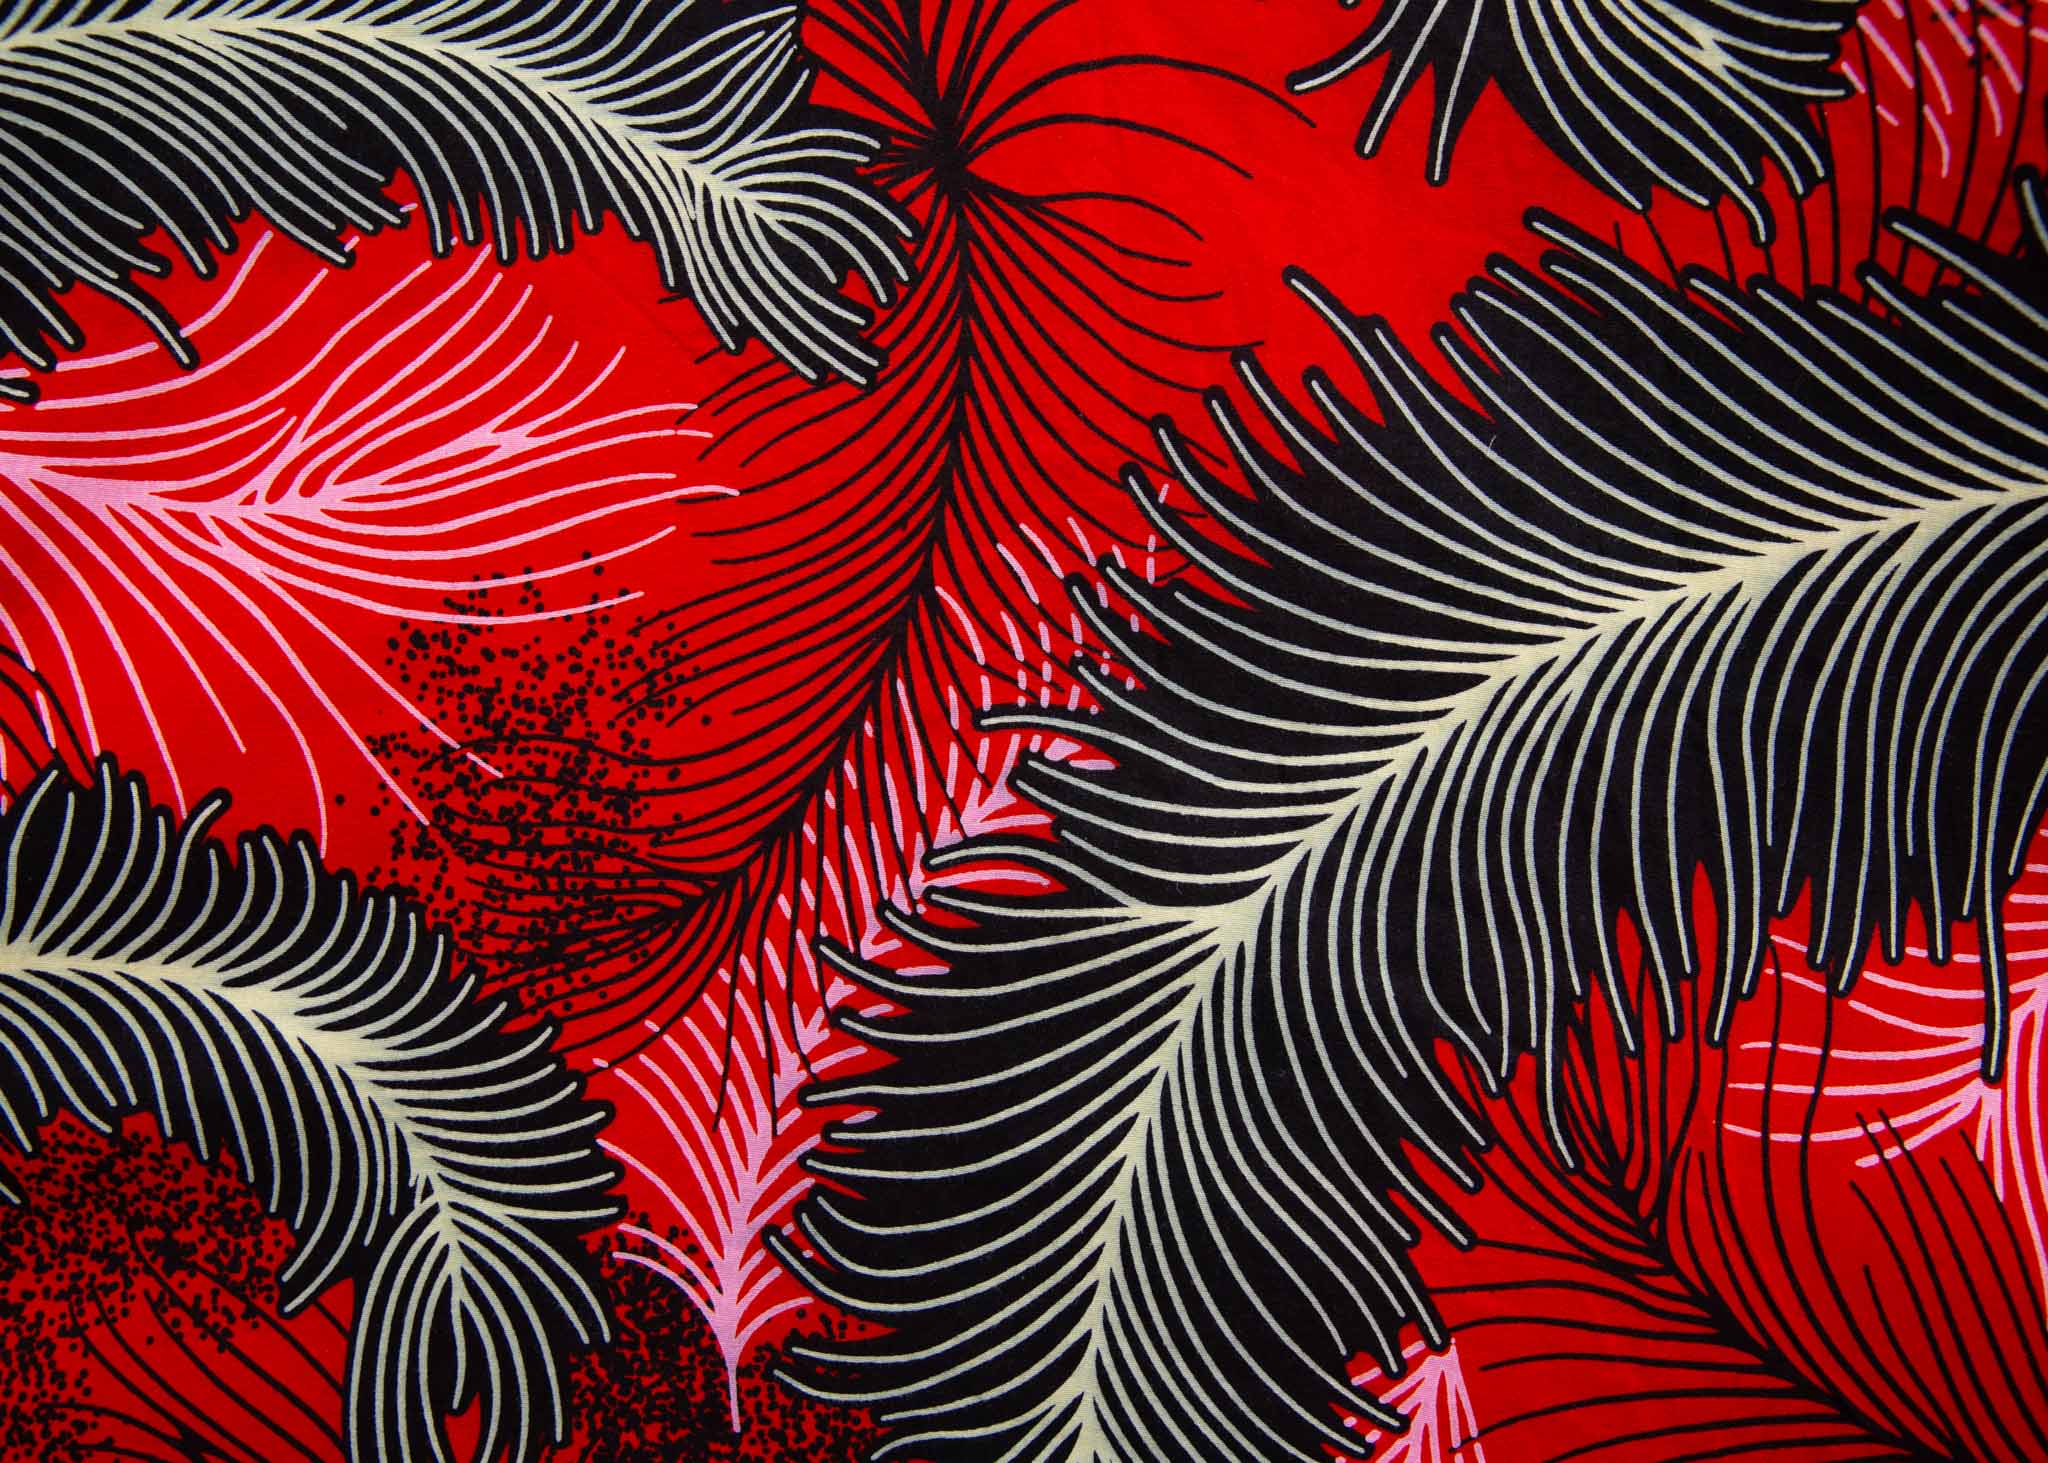 Close up display of red dress with black and white feather print, fabric.